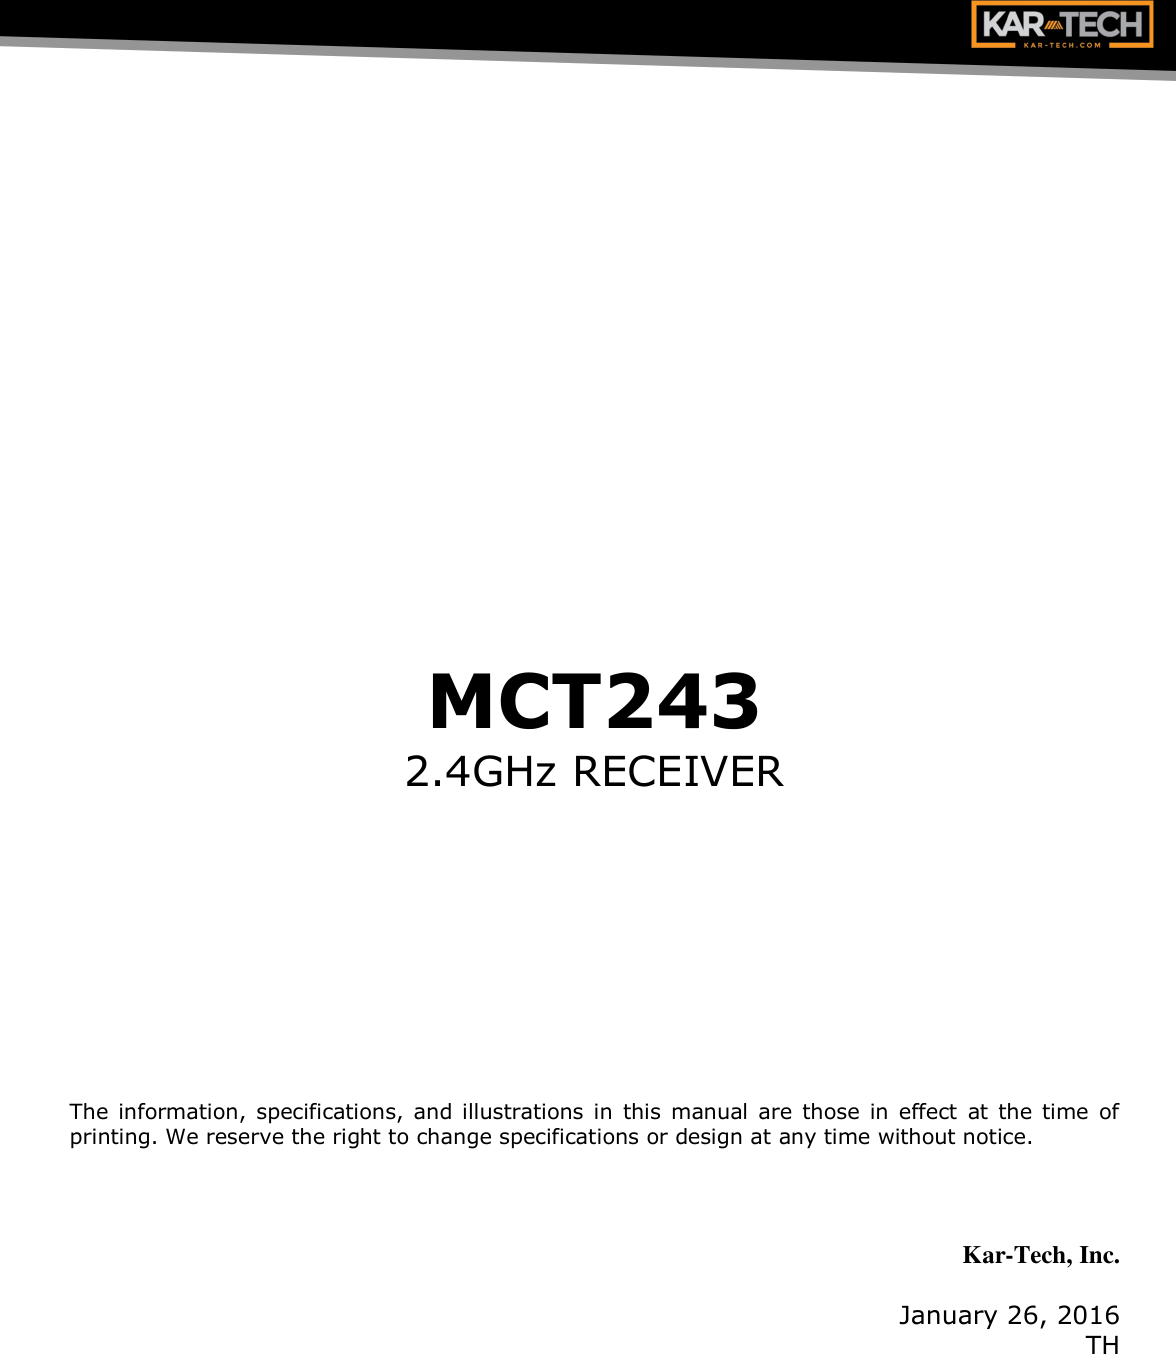        MCT243 2.4GHz RECEIVER           The information, specifications, and illustrations in  this manual  are those in effect at  the time of printing. We reserve the right to change specifications or design at any time without notice.    Kar-Tech, Inc.  January 26, 2016 TH 